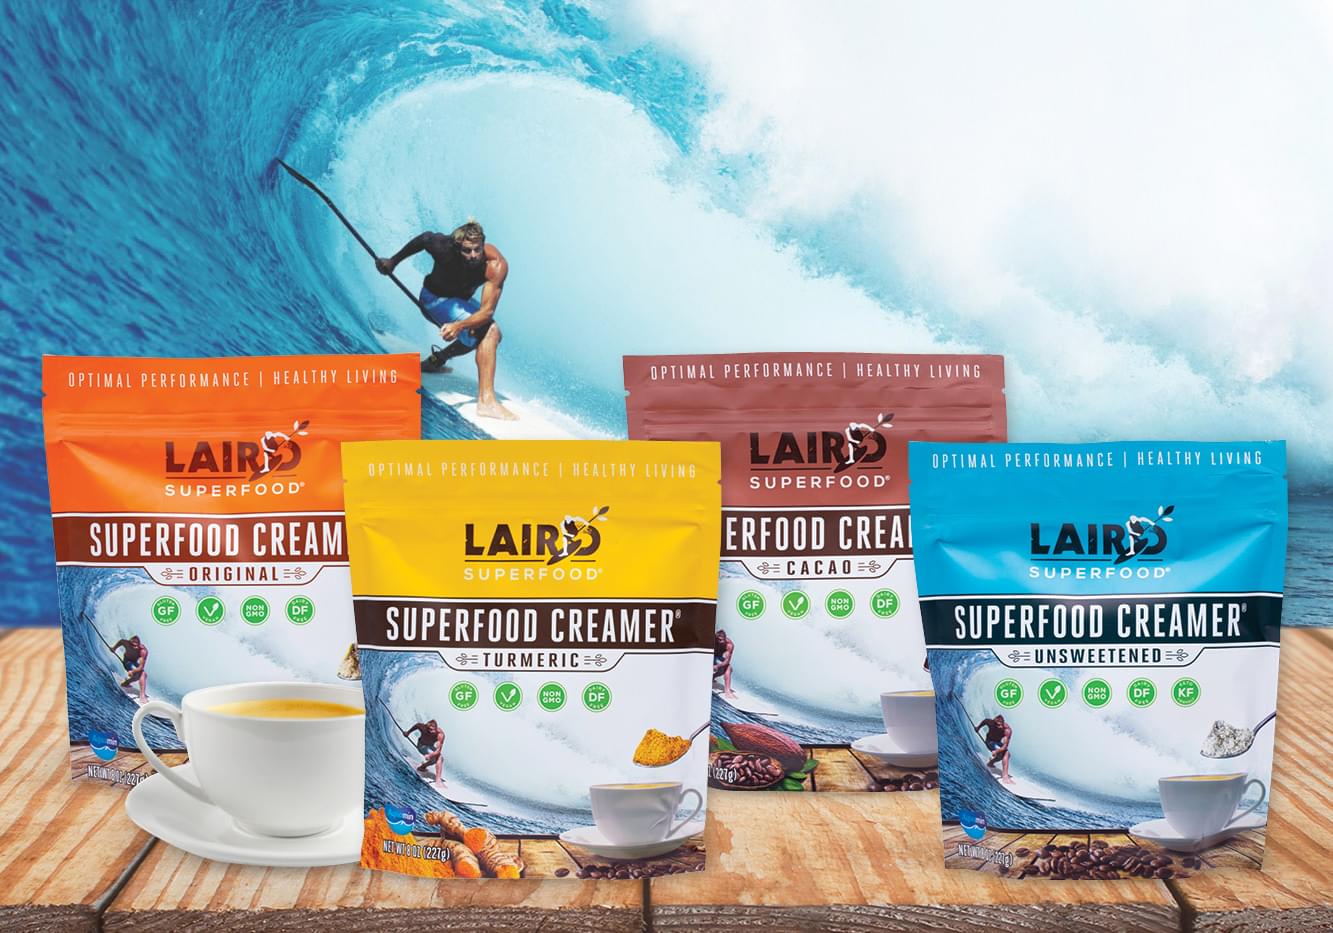 Case study: Laird Superfood